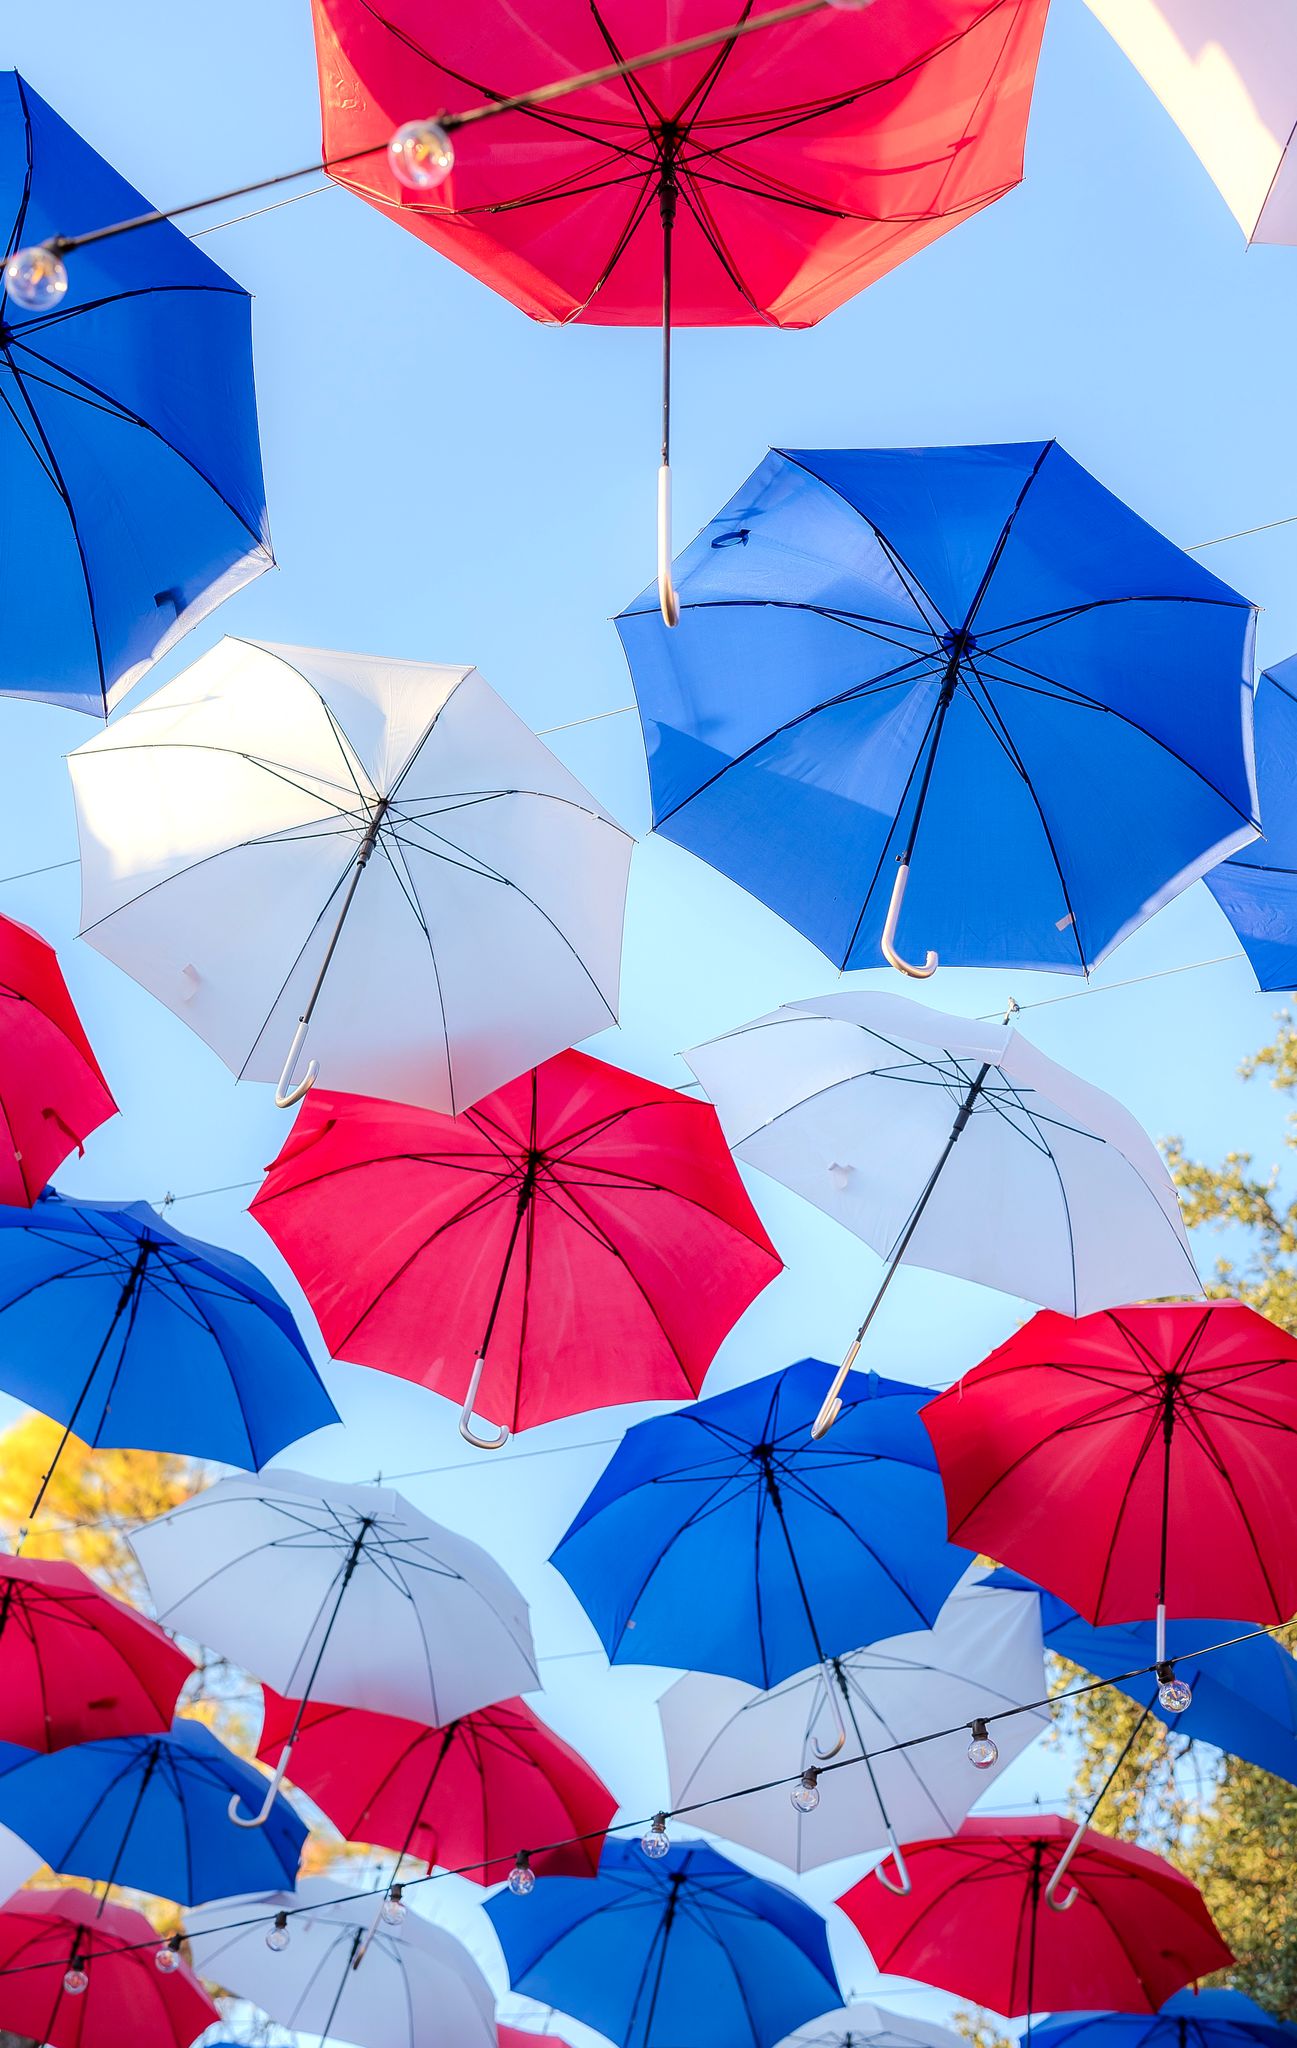 Umbrellas help shade visitors at the State Fair of Texas